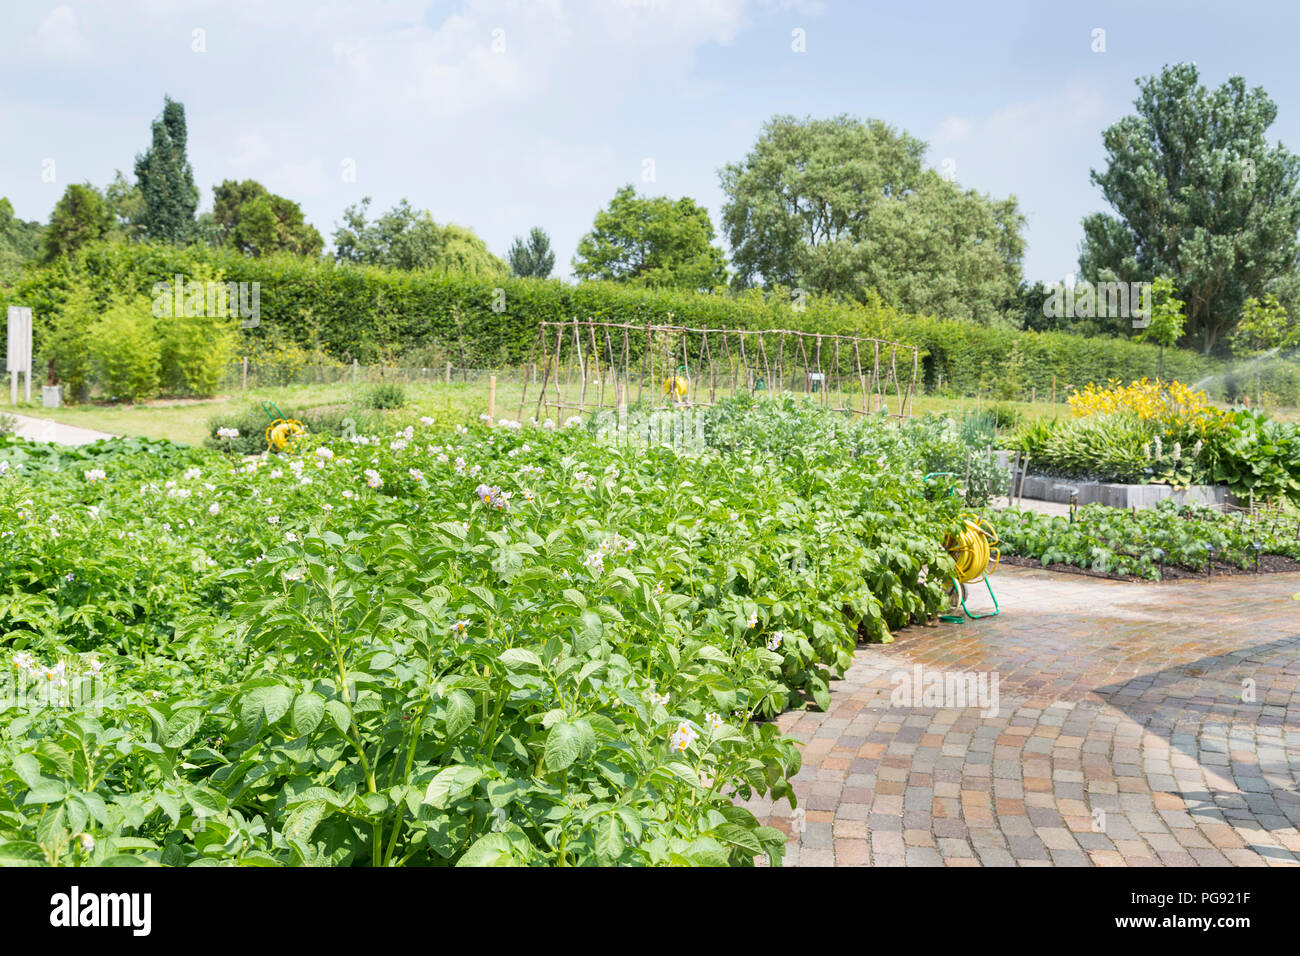 A row of potato plants blossoms in summer on RHS Hyde Hall garden - UK Stock Photo